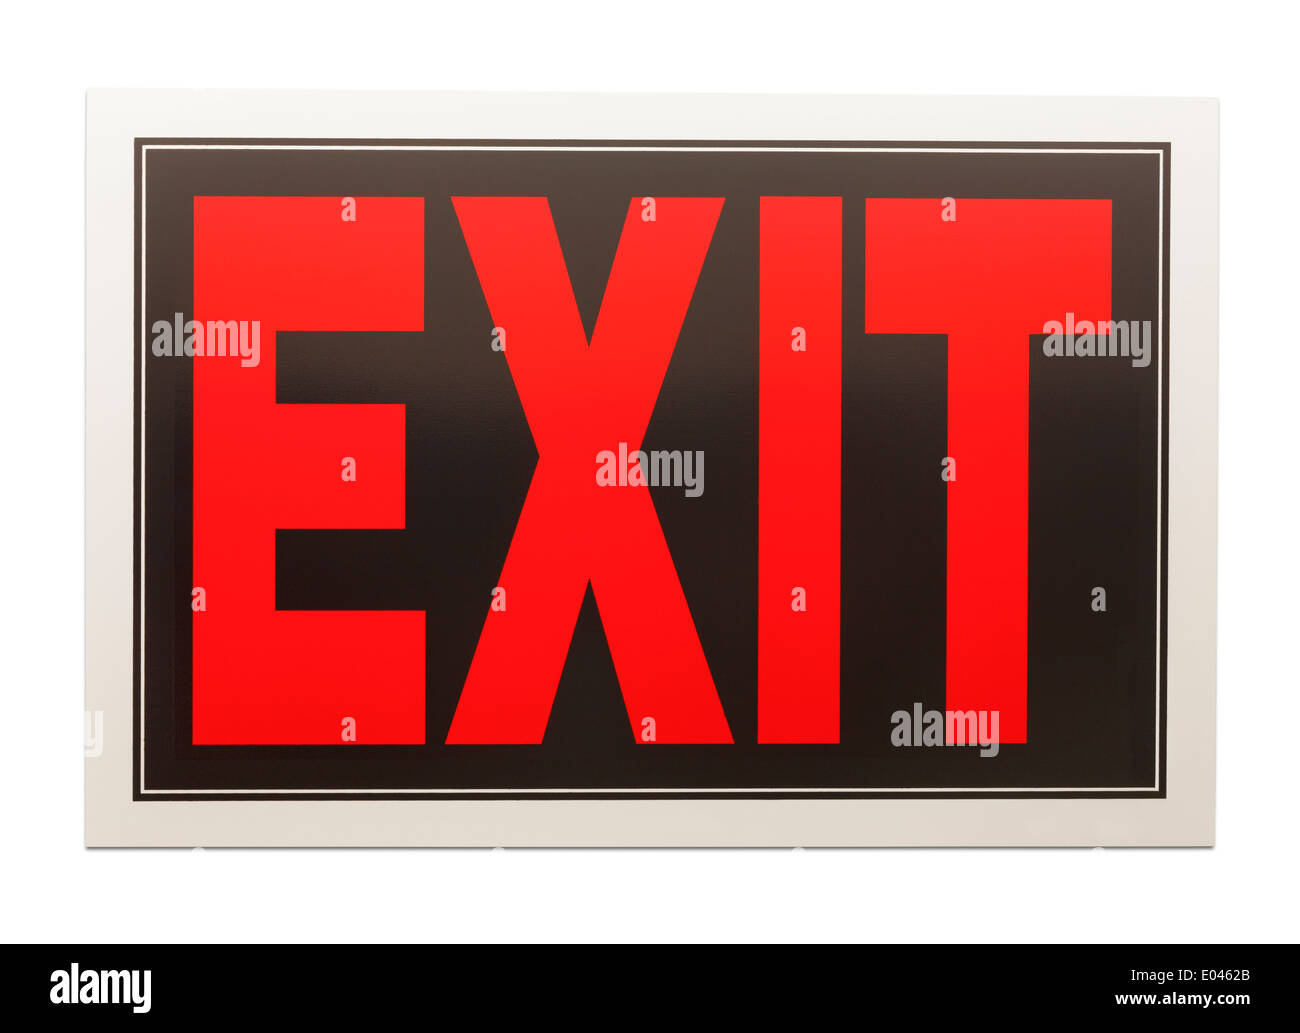 Red and Black Exit Sign Isolated on a White Background. Stock Photo